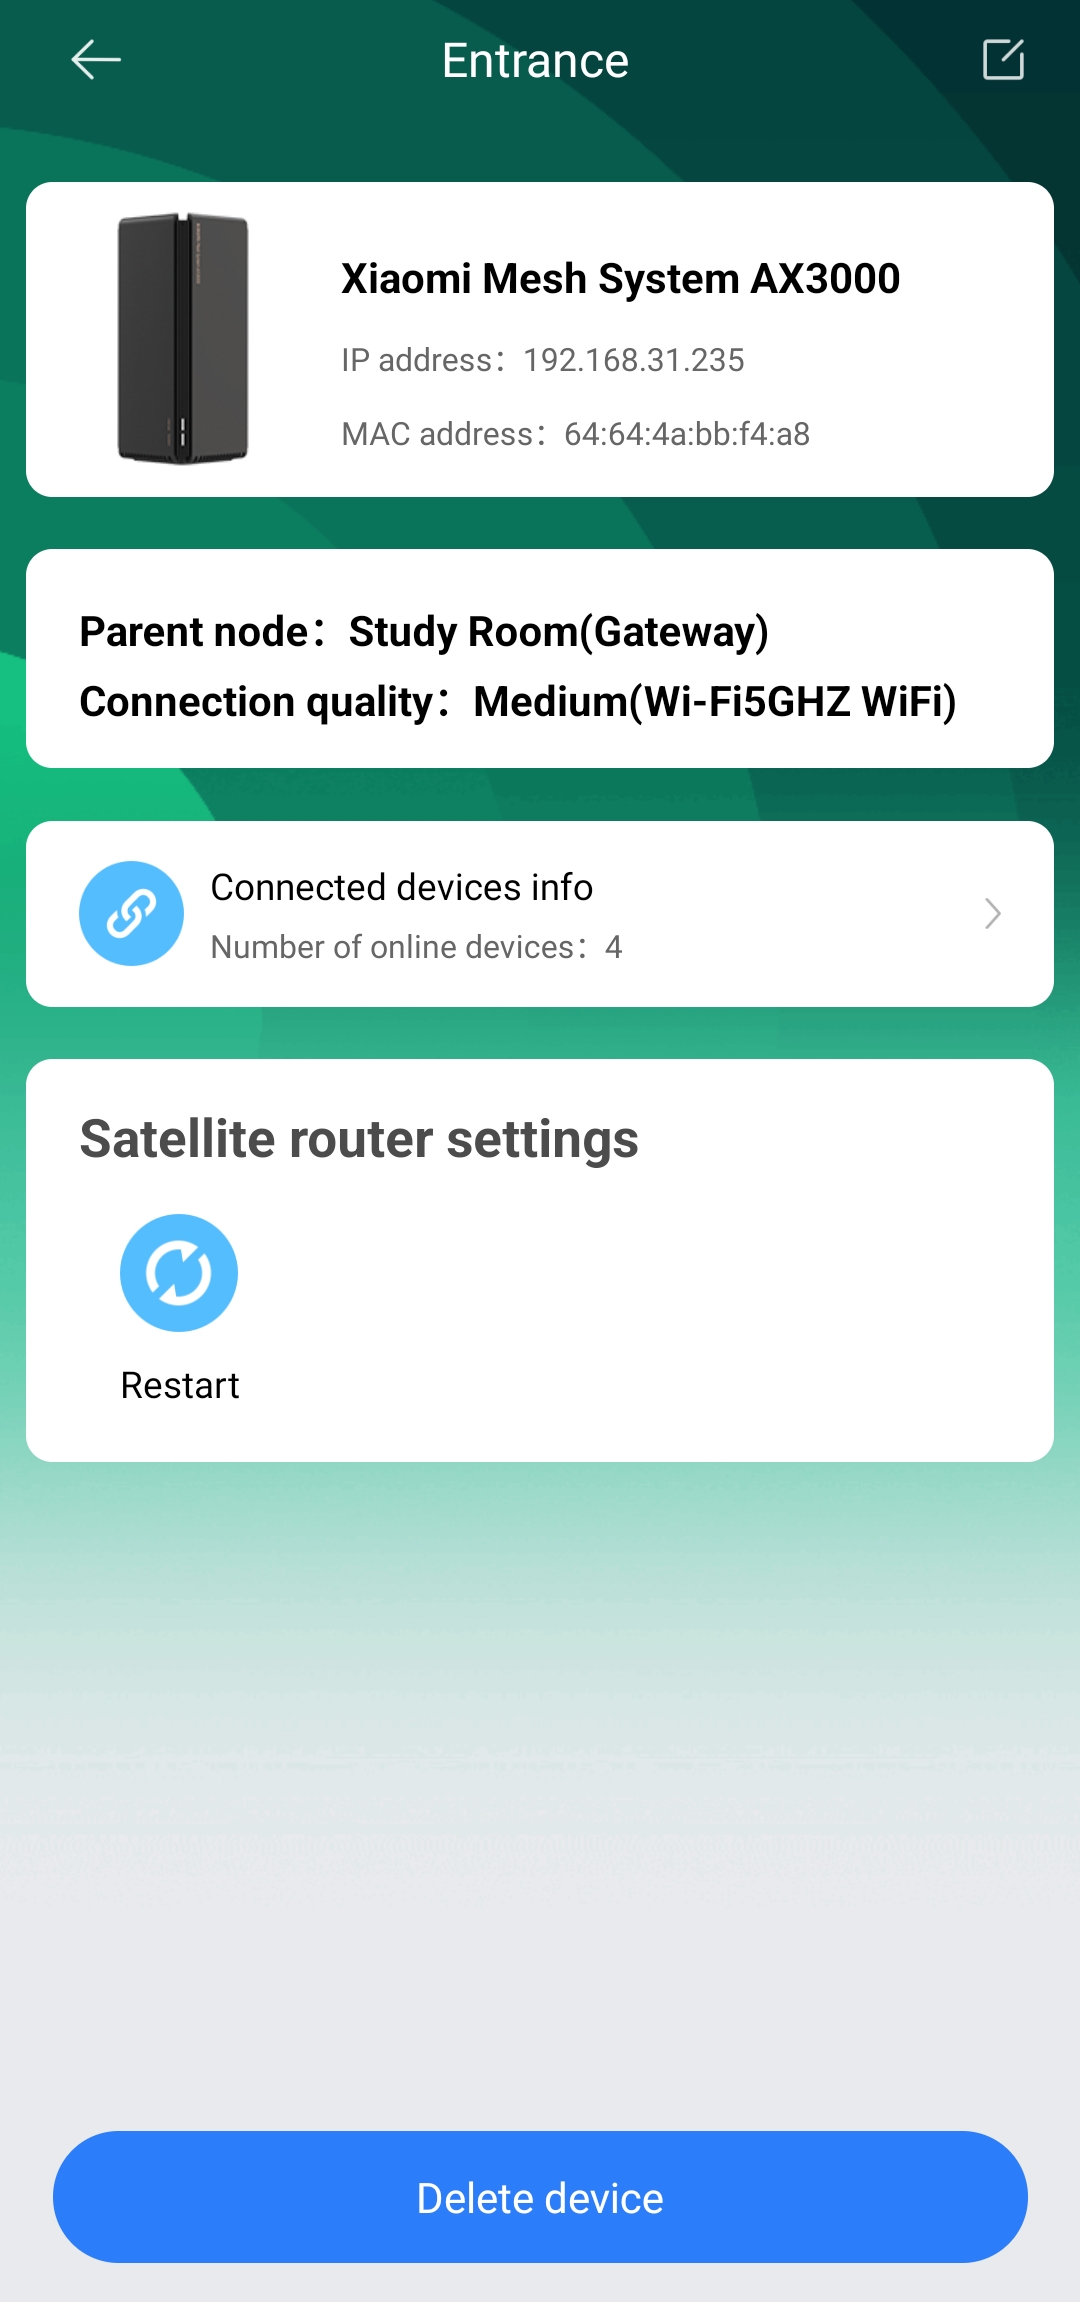 Subject: Help Needed: Connecting Xiaomi AX3000 Nodes Properly for